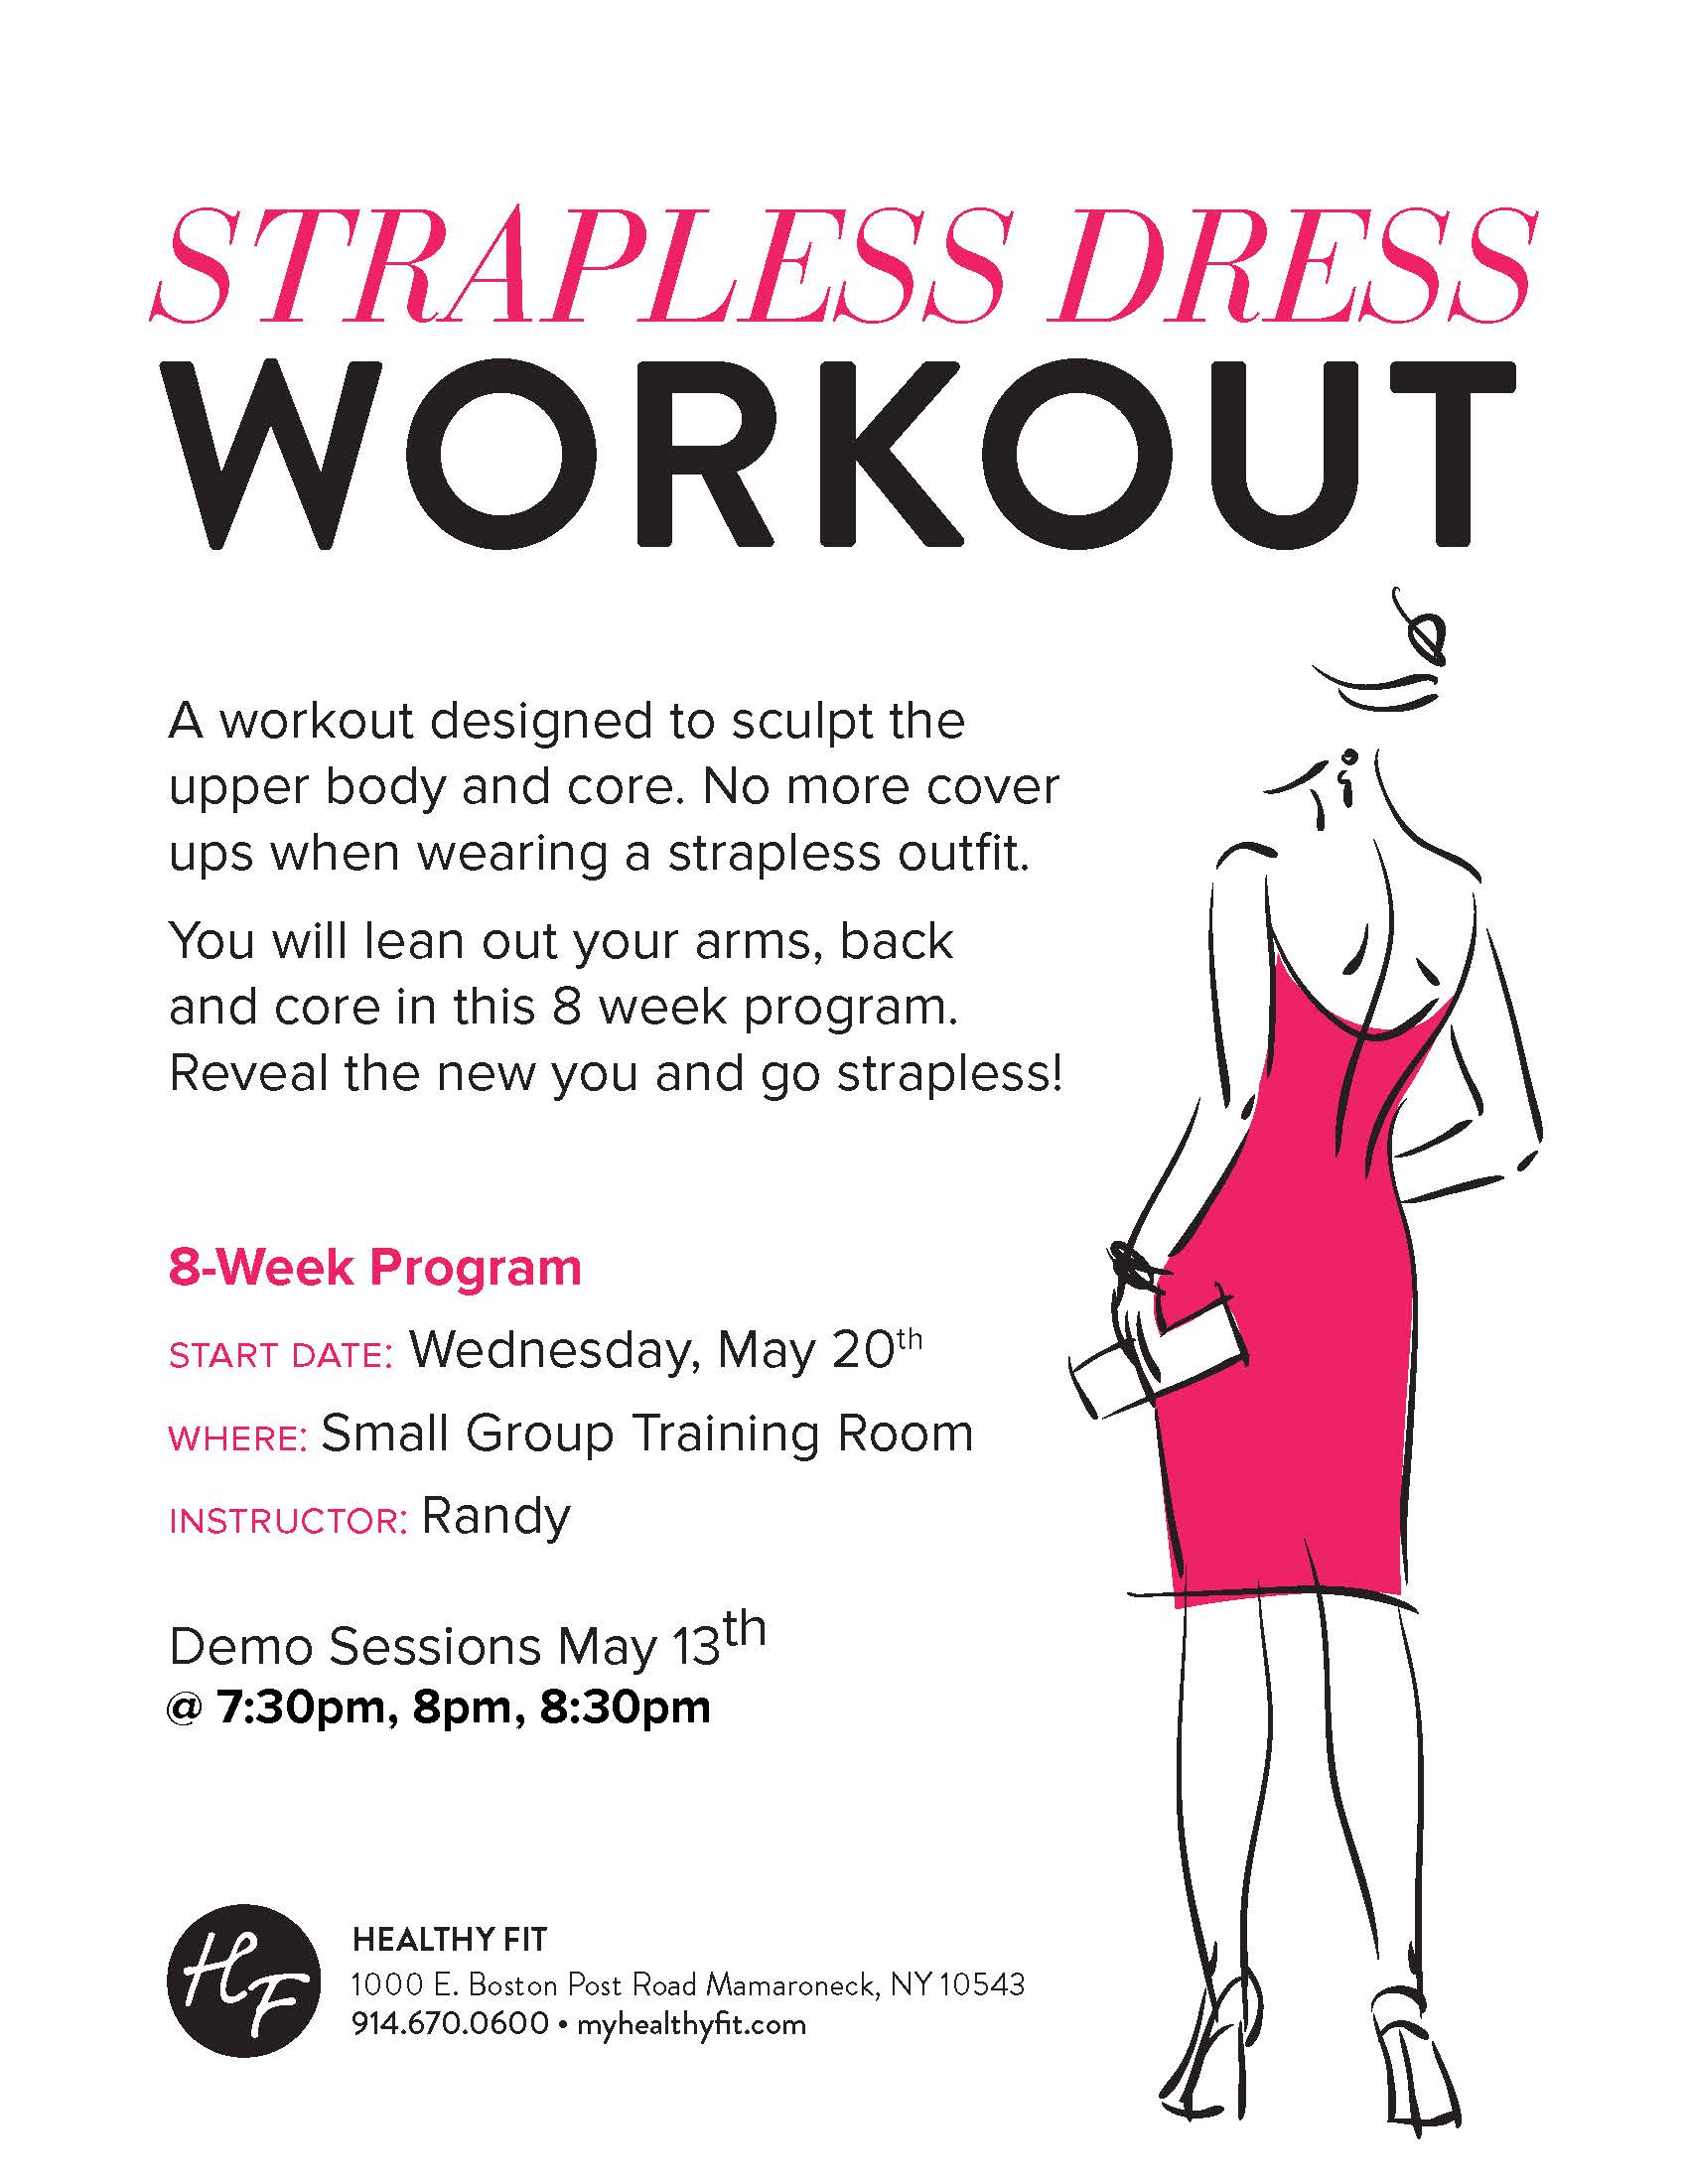 More demo slots added to Strapless Dress Workout! - HealthyFit